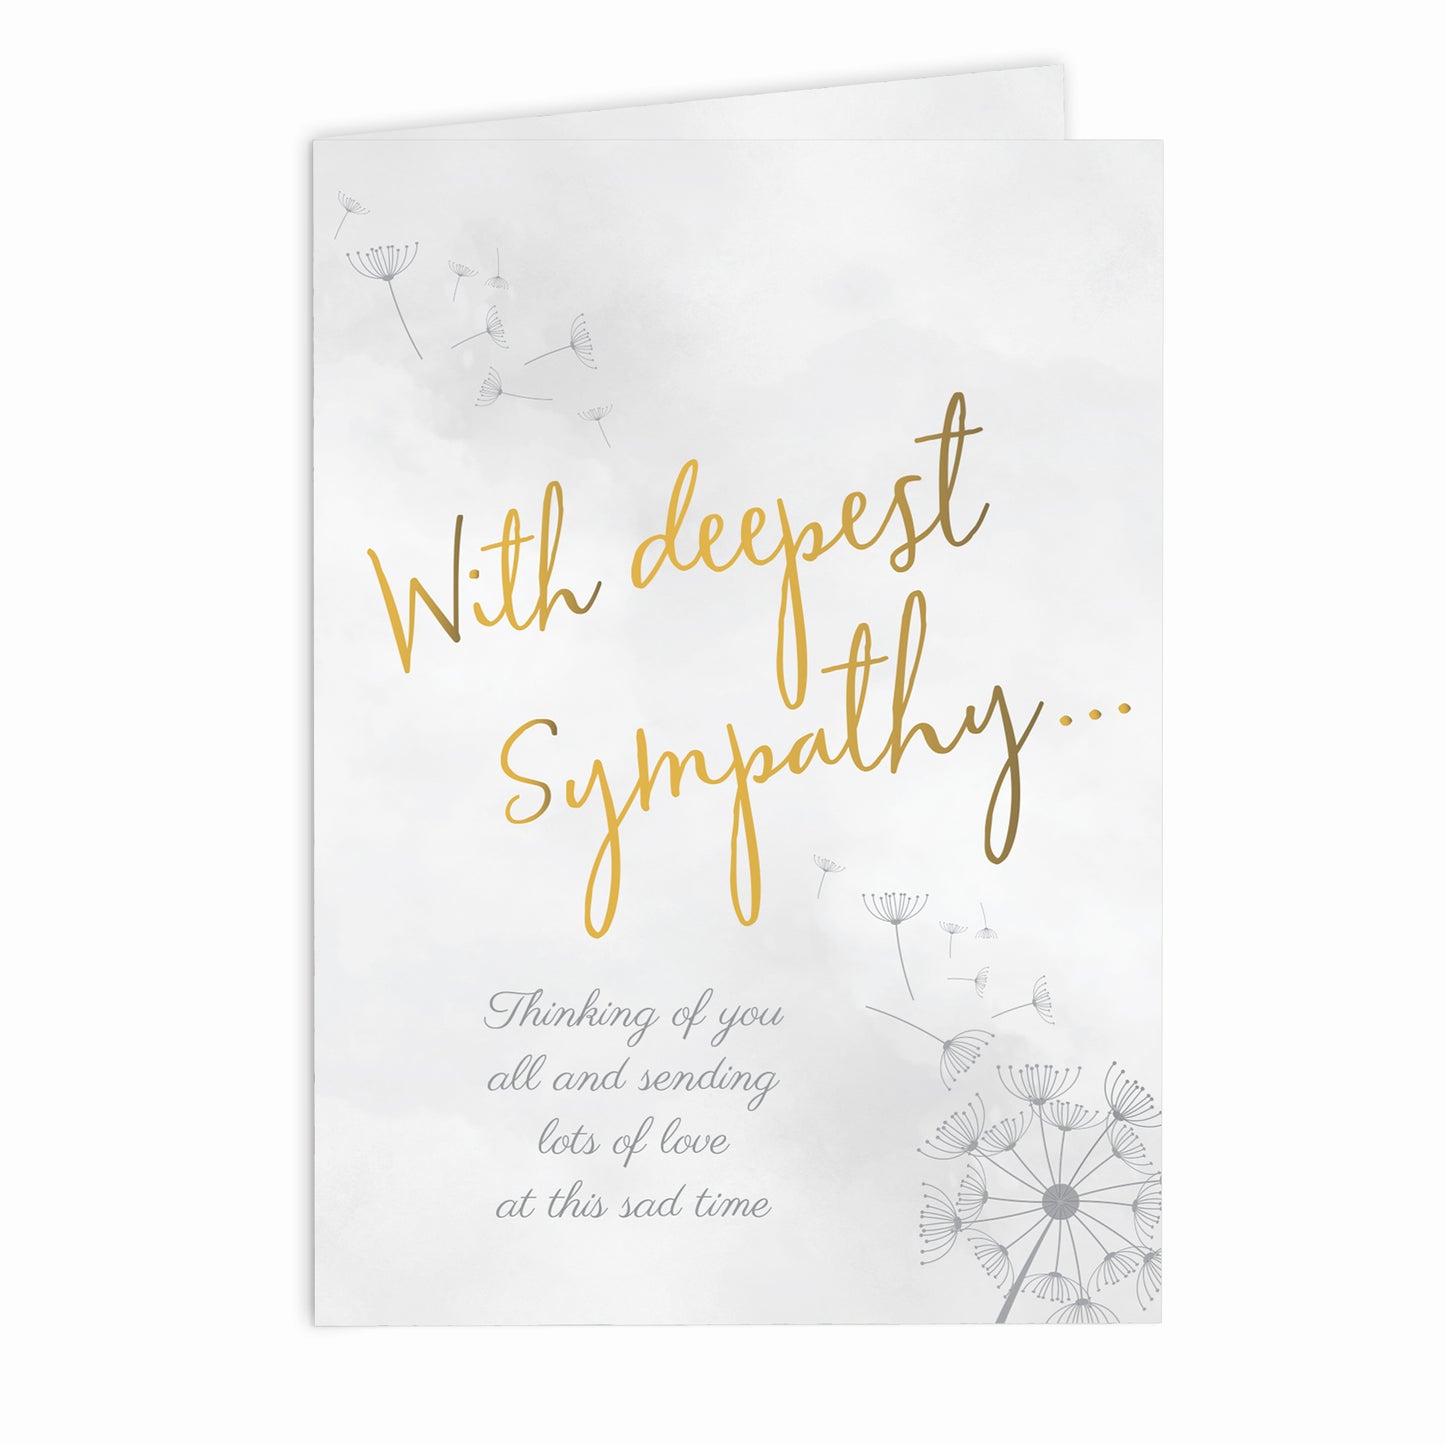 Personalised Deepest Sympathy Card Add Any Name - Personalise It!